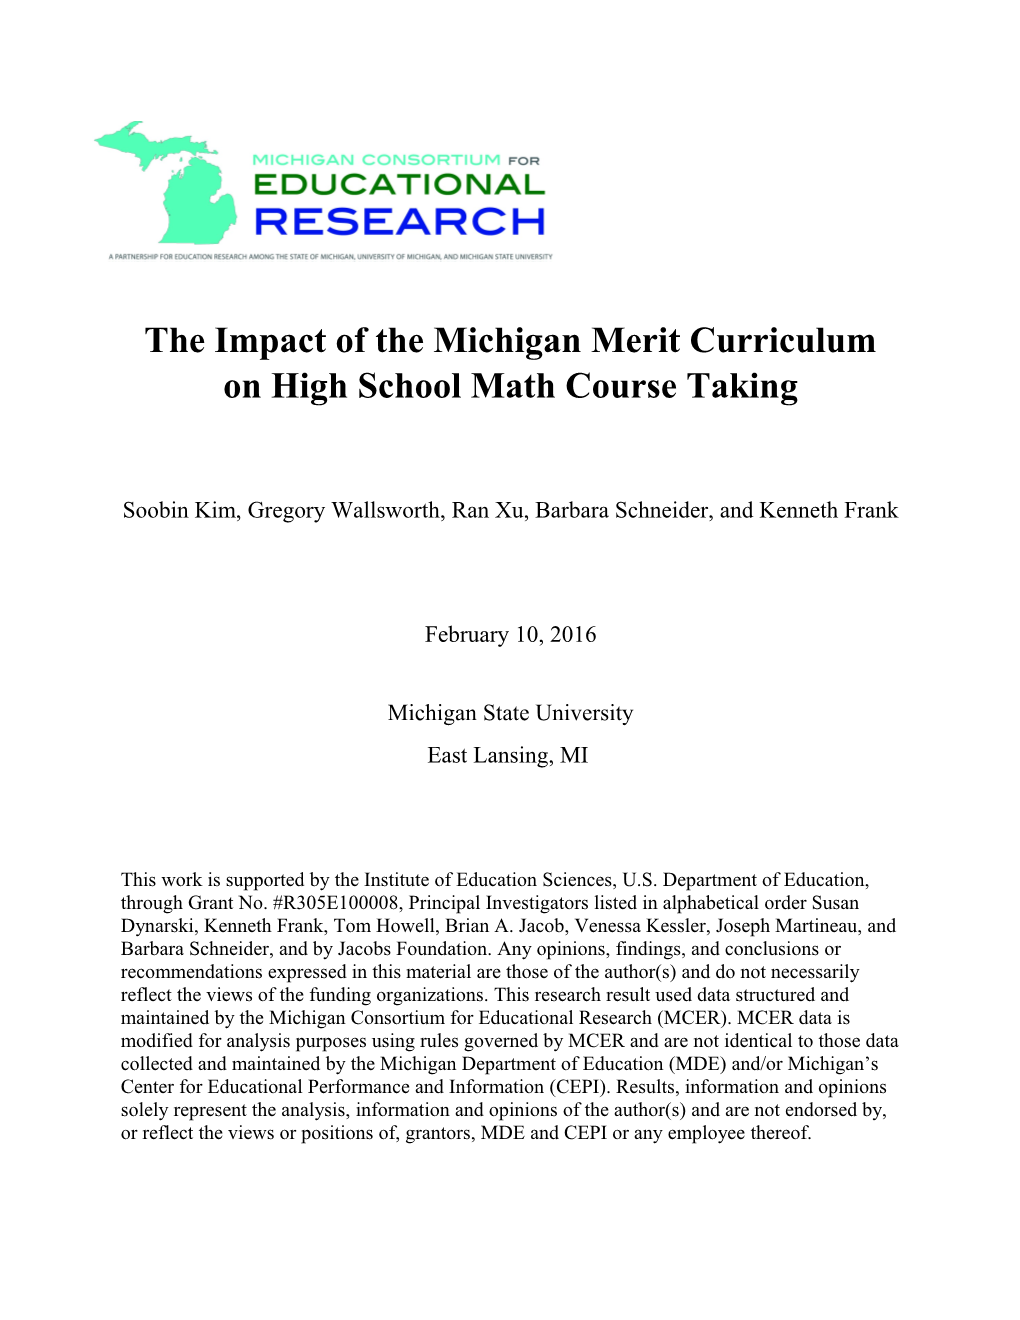 The Impact of the Michigan Merit Curriculum on High School Math Course Taking